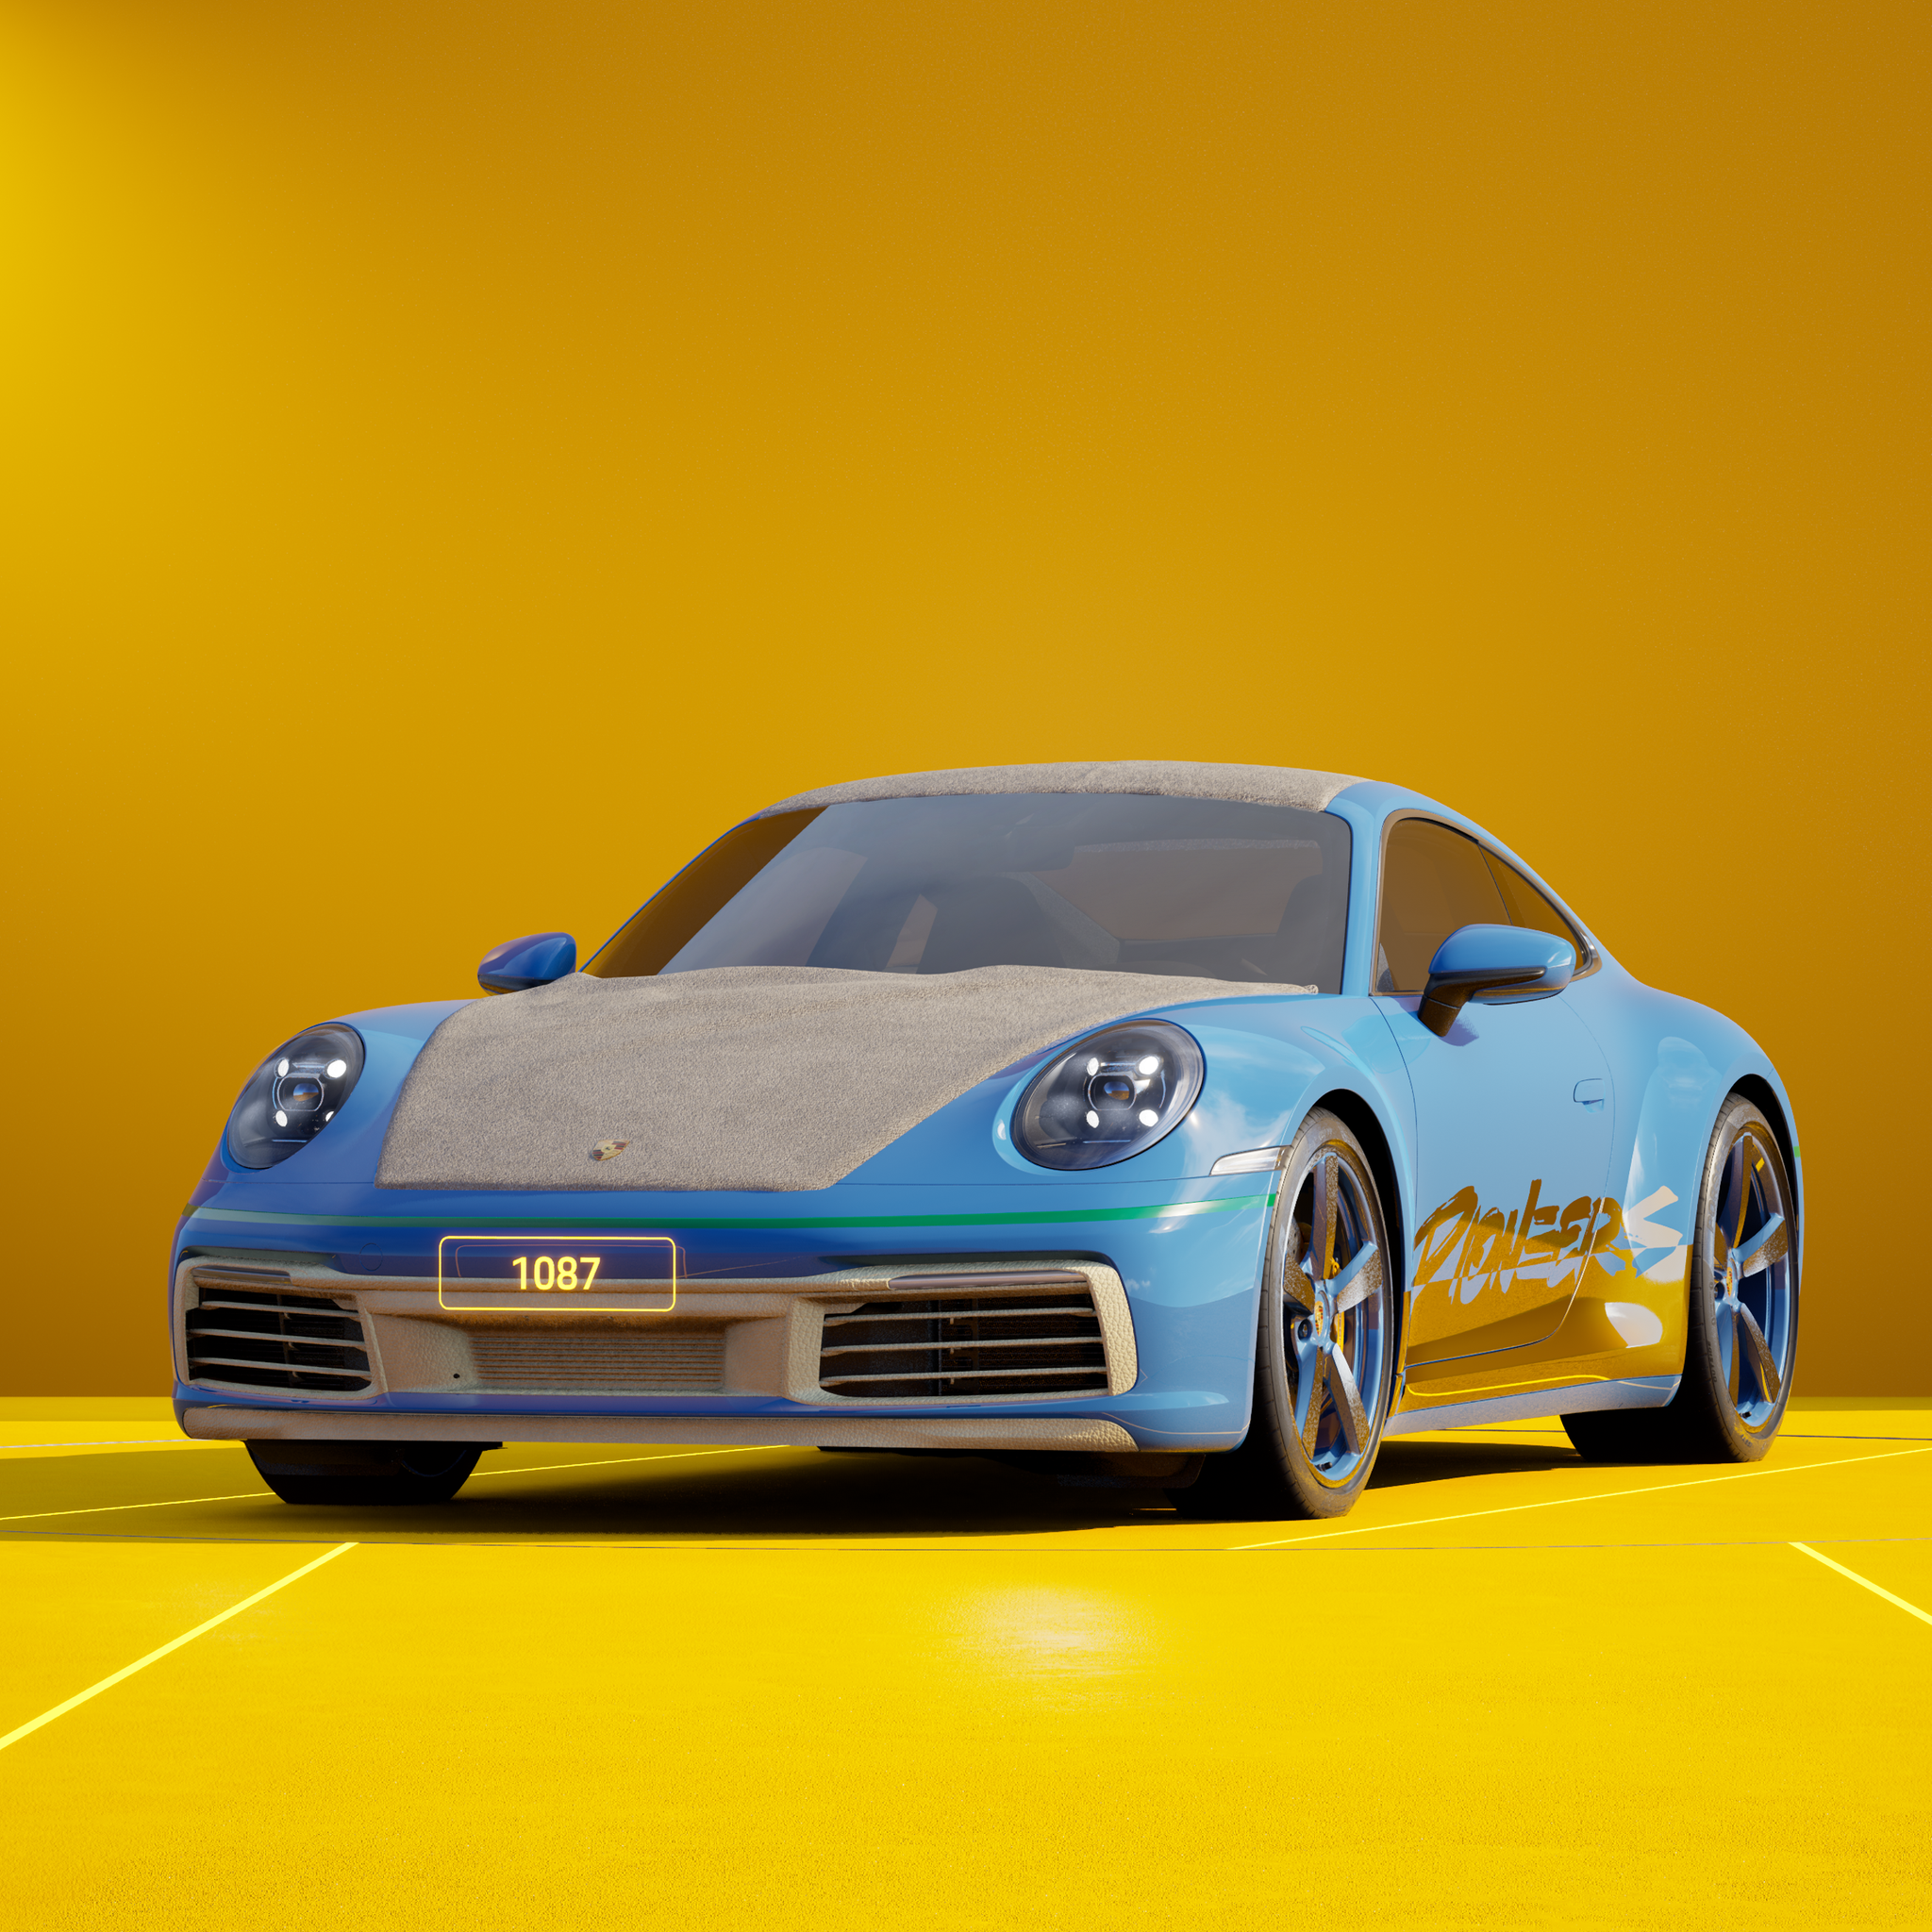 The PORSCHΞ 911 1087 image in phase